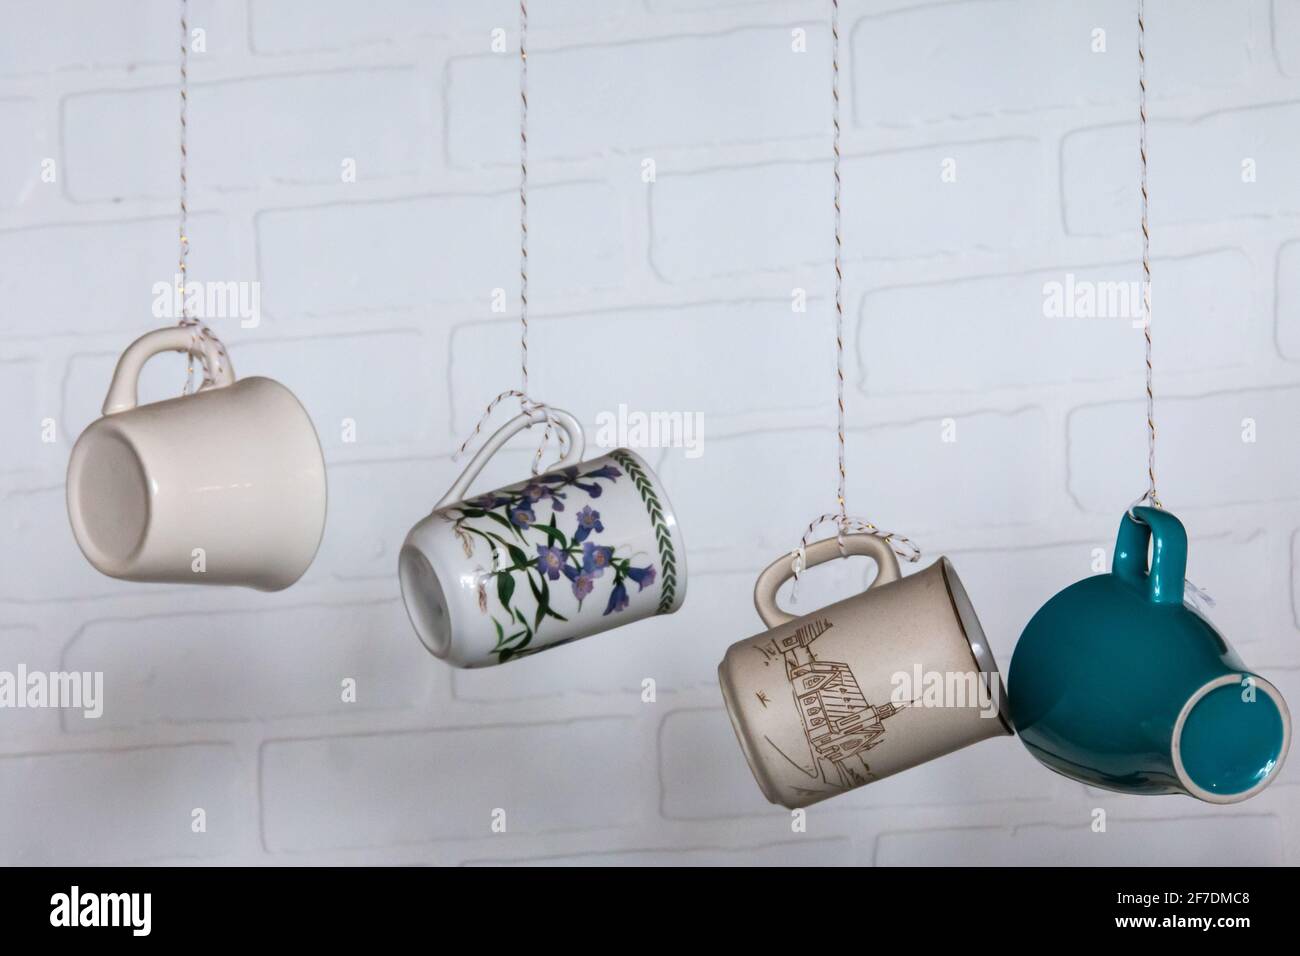 Coffee or tea ceramic mugs dangling from strings at a cute retro cafe in the wintertime. Stock Photo